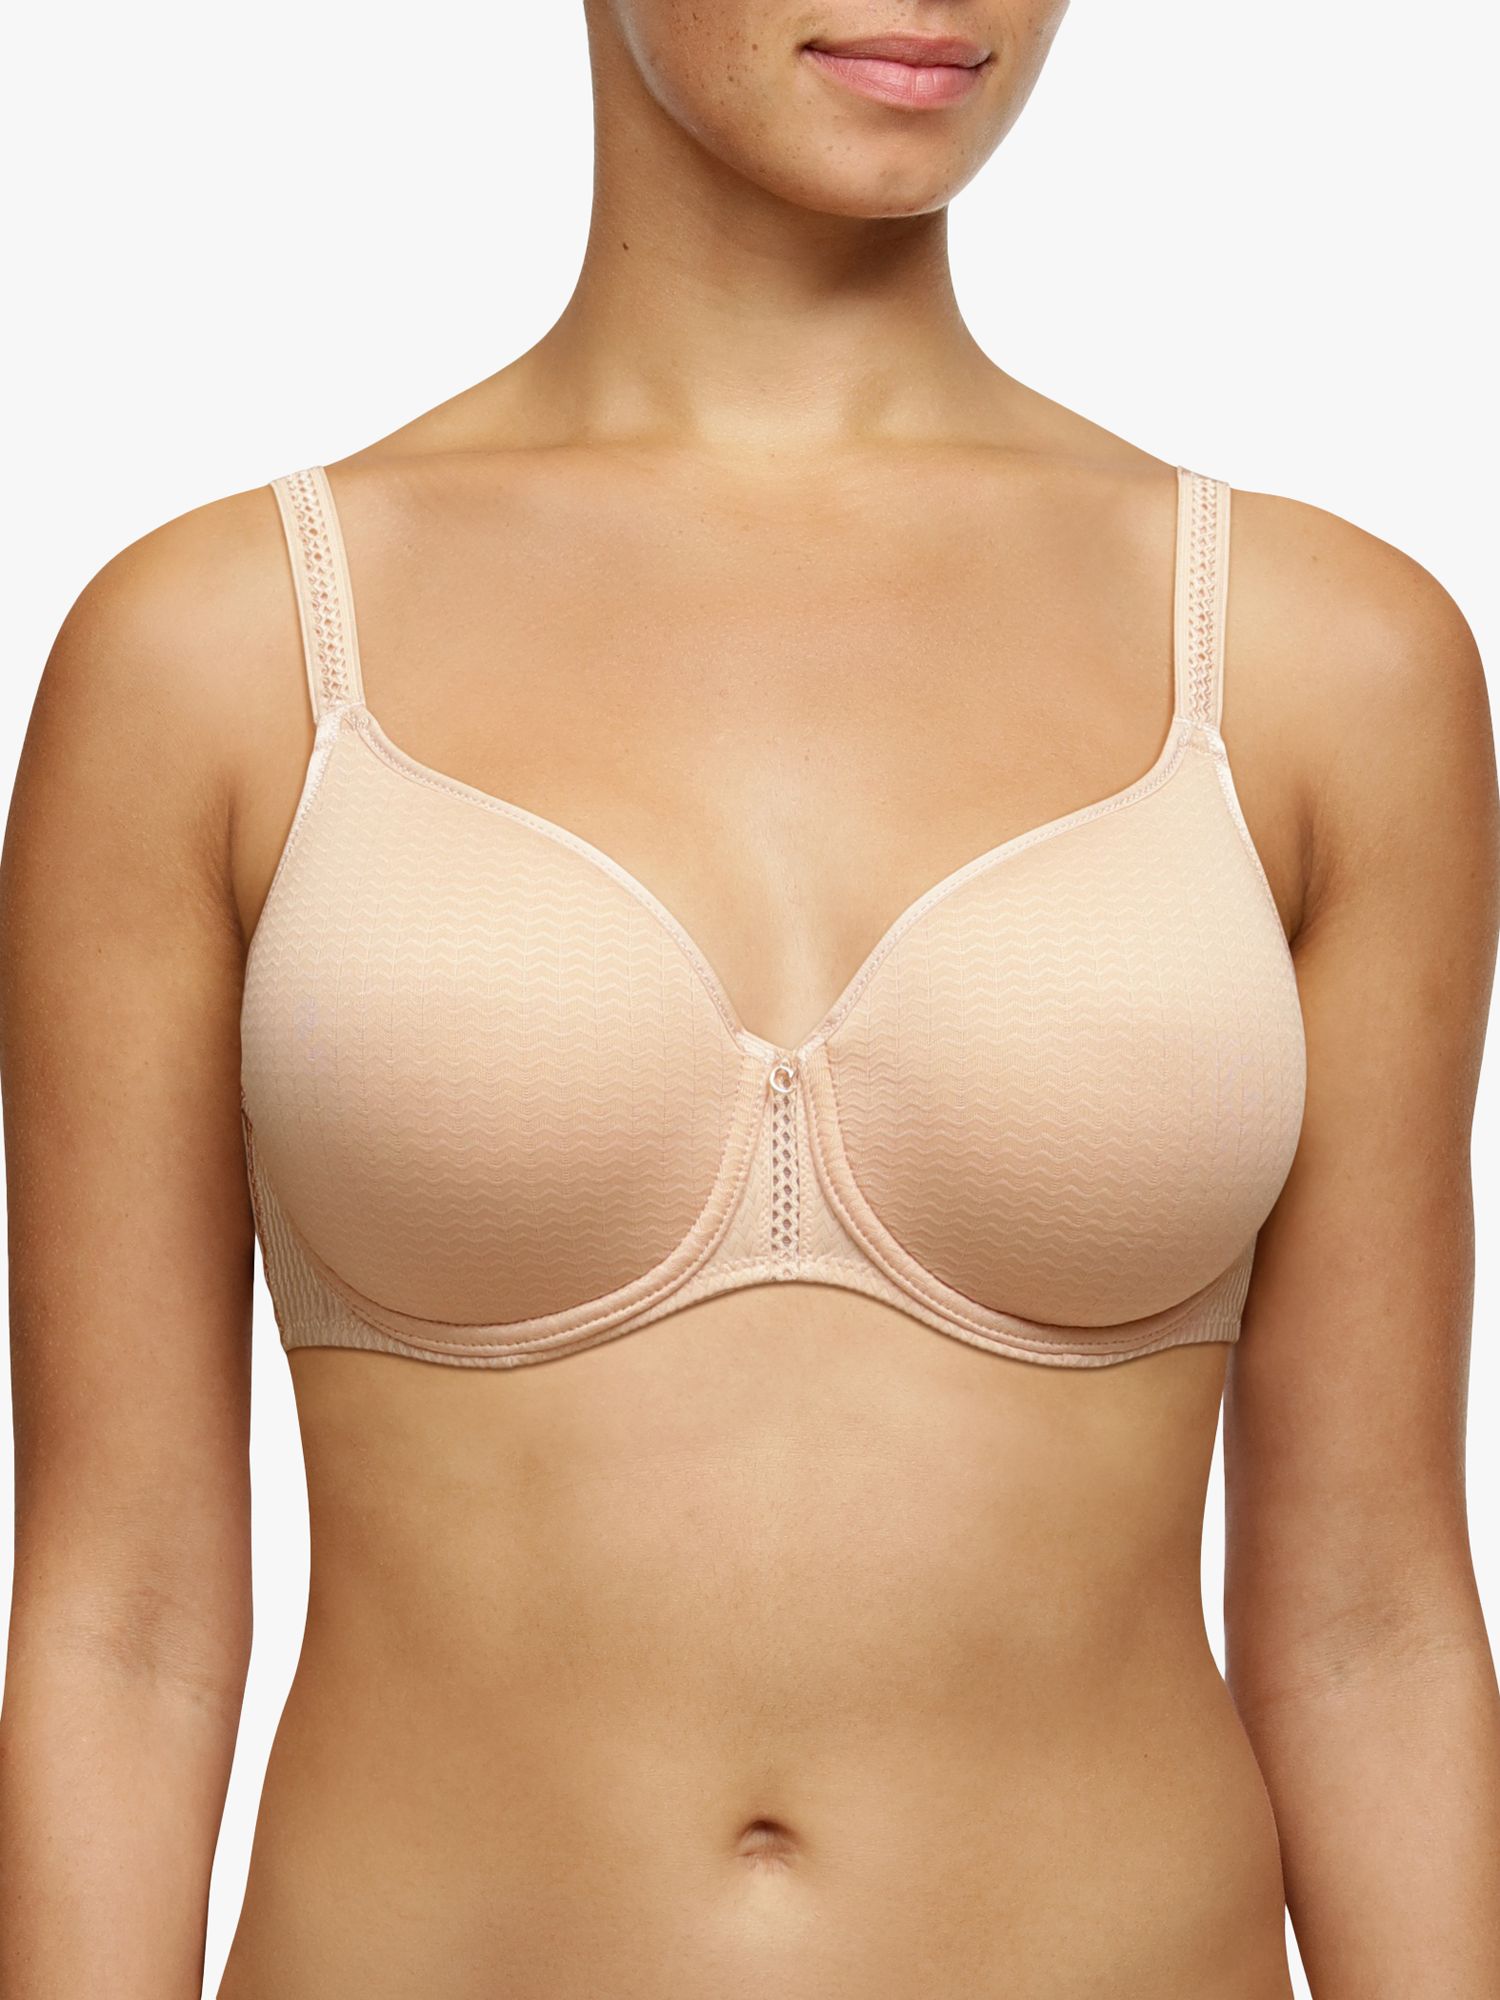 Fantasie Belle Underwired Full Cup Bra, White at John Lewis & Partners